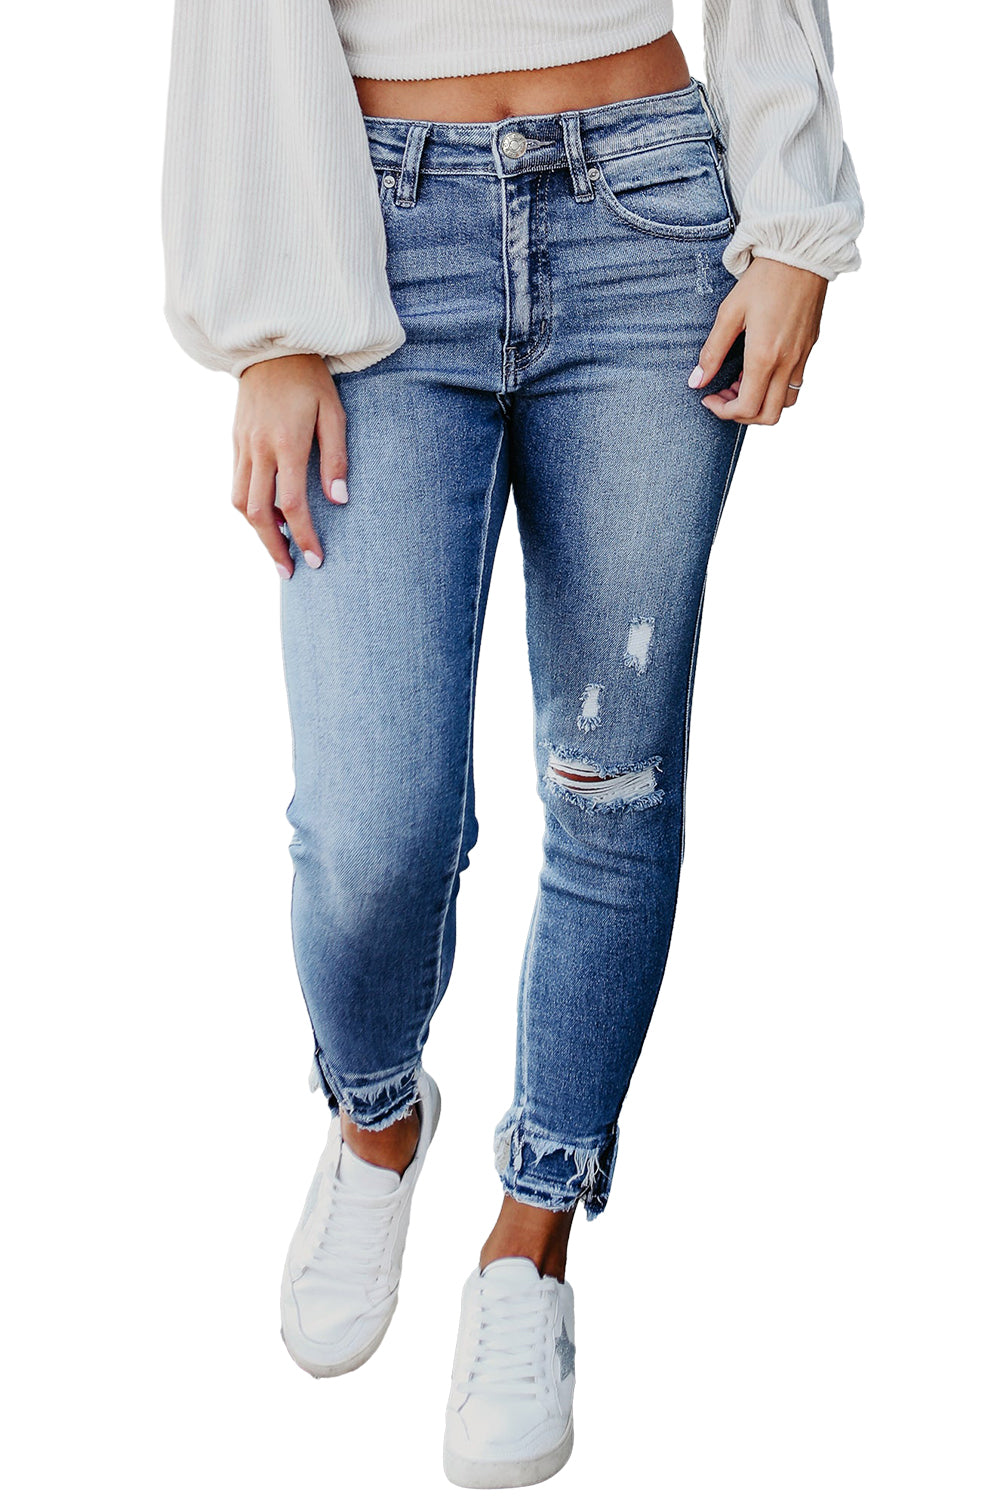 Light Blue Distressed Frayed Ankle Skinny Jeans, Plus Size Jeans, Torn Jeans, mid rise jeans